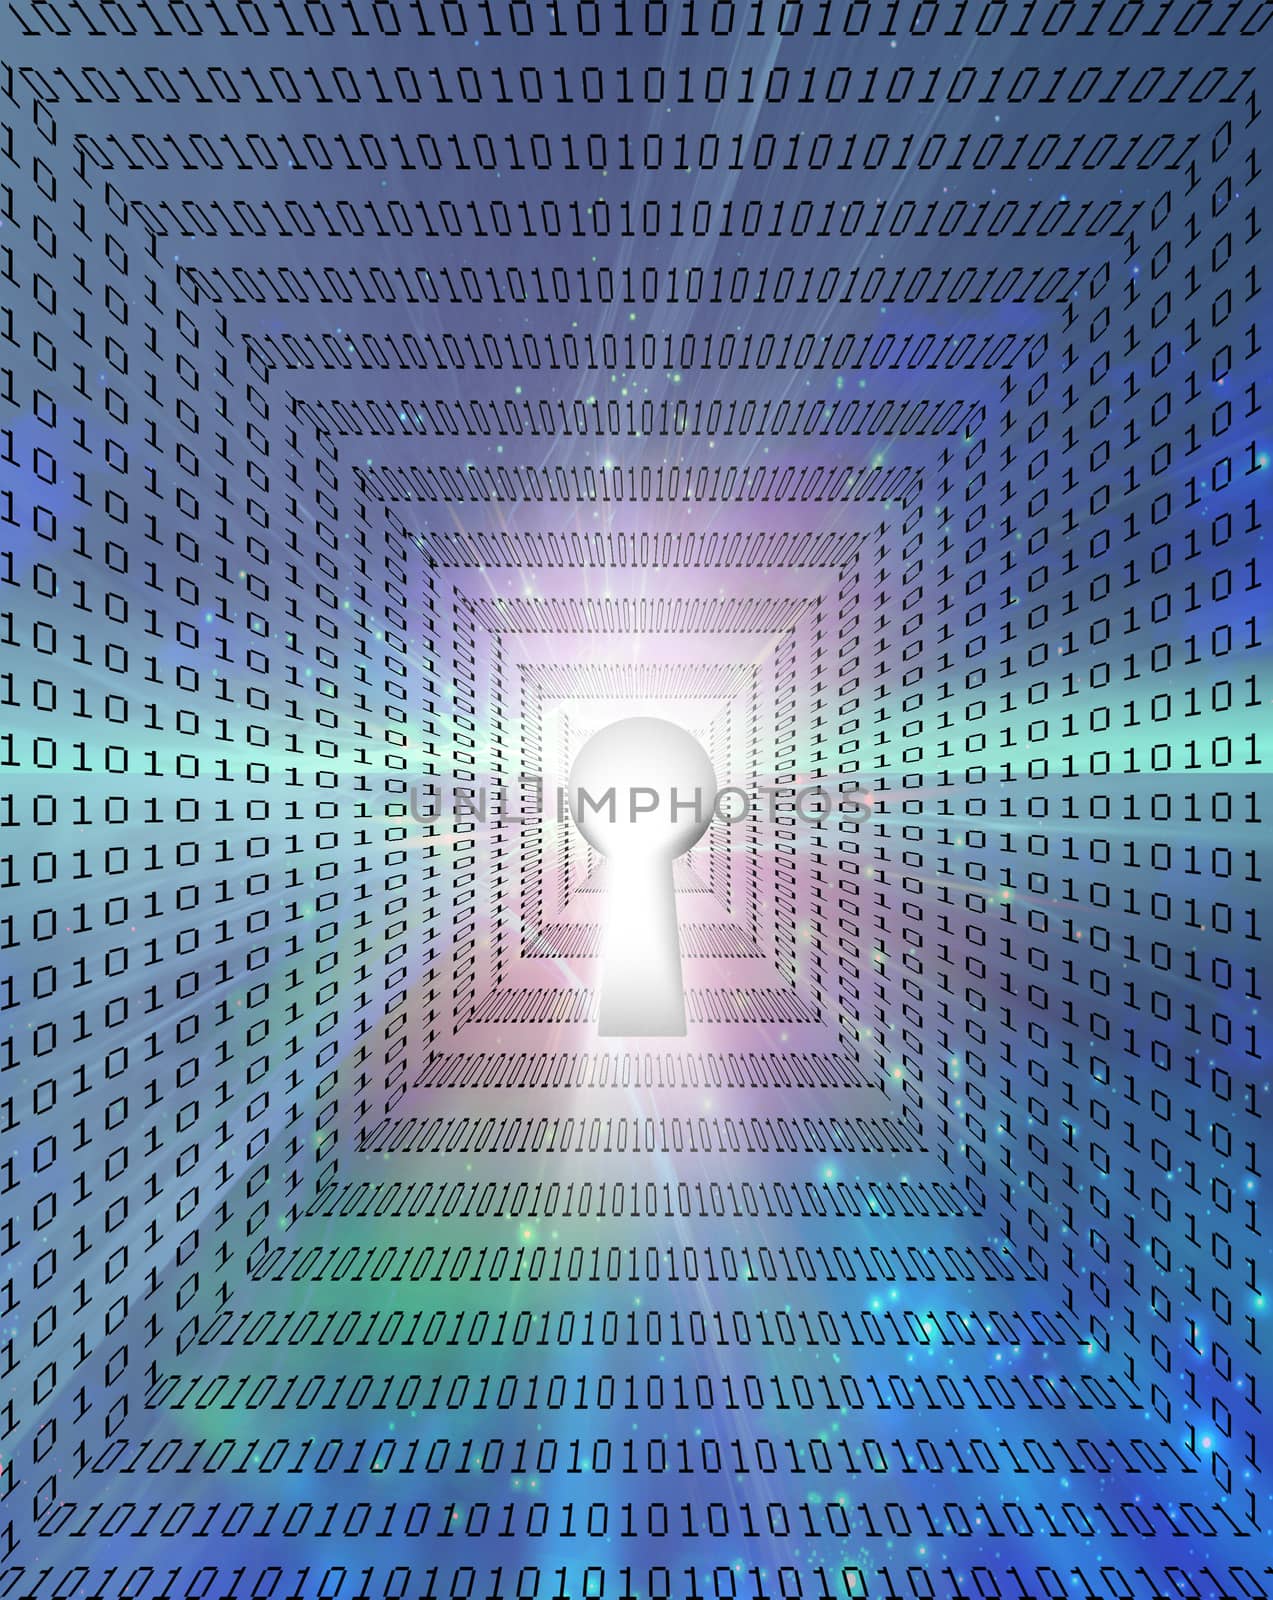 Modern art. Keyhole and binary code on a background. 3D rendering